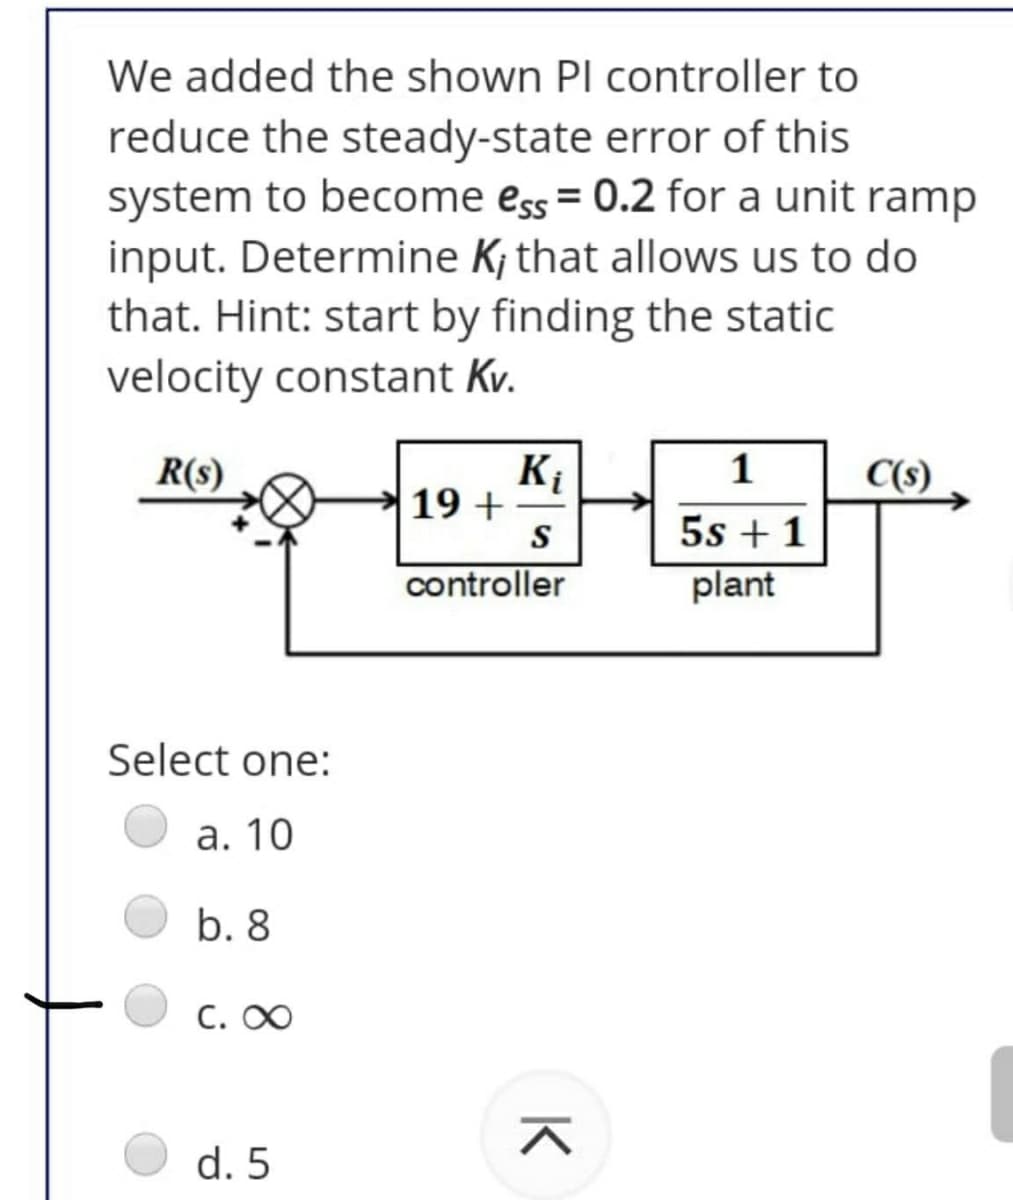 We added the shown Pl controller to
reduce the steady-state error of this
system to become ess = 0.2 for a unit ramp
input. Determine K; that allows us to do
that. Hint: start by finding the static
velocity constant Kv.
K
19 +
S
R(s)
1
C(s)
5s + 1
plant
controller
Select one:
а. 10
b. 8
C. 0
d. 5
K
